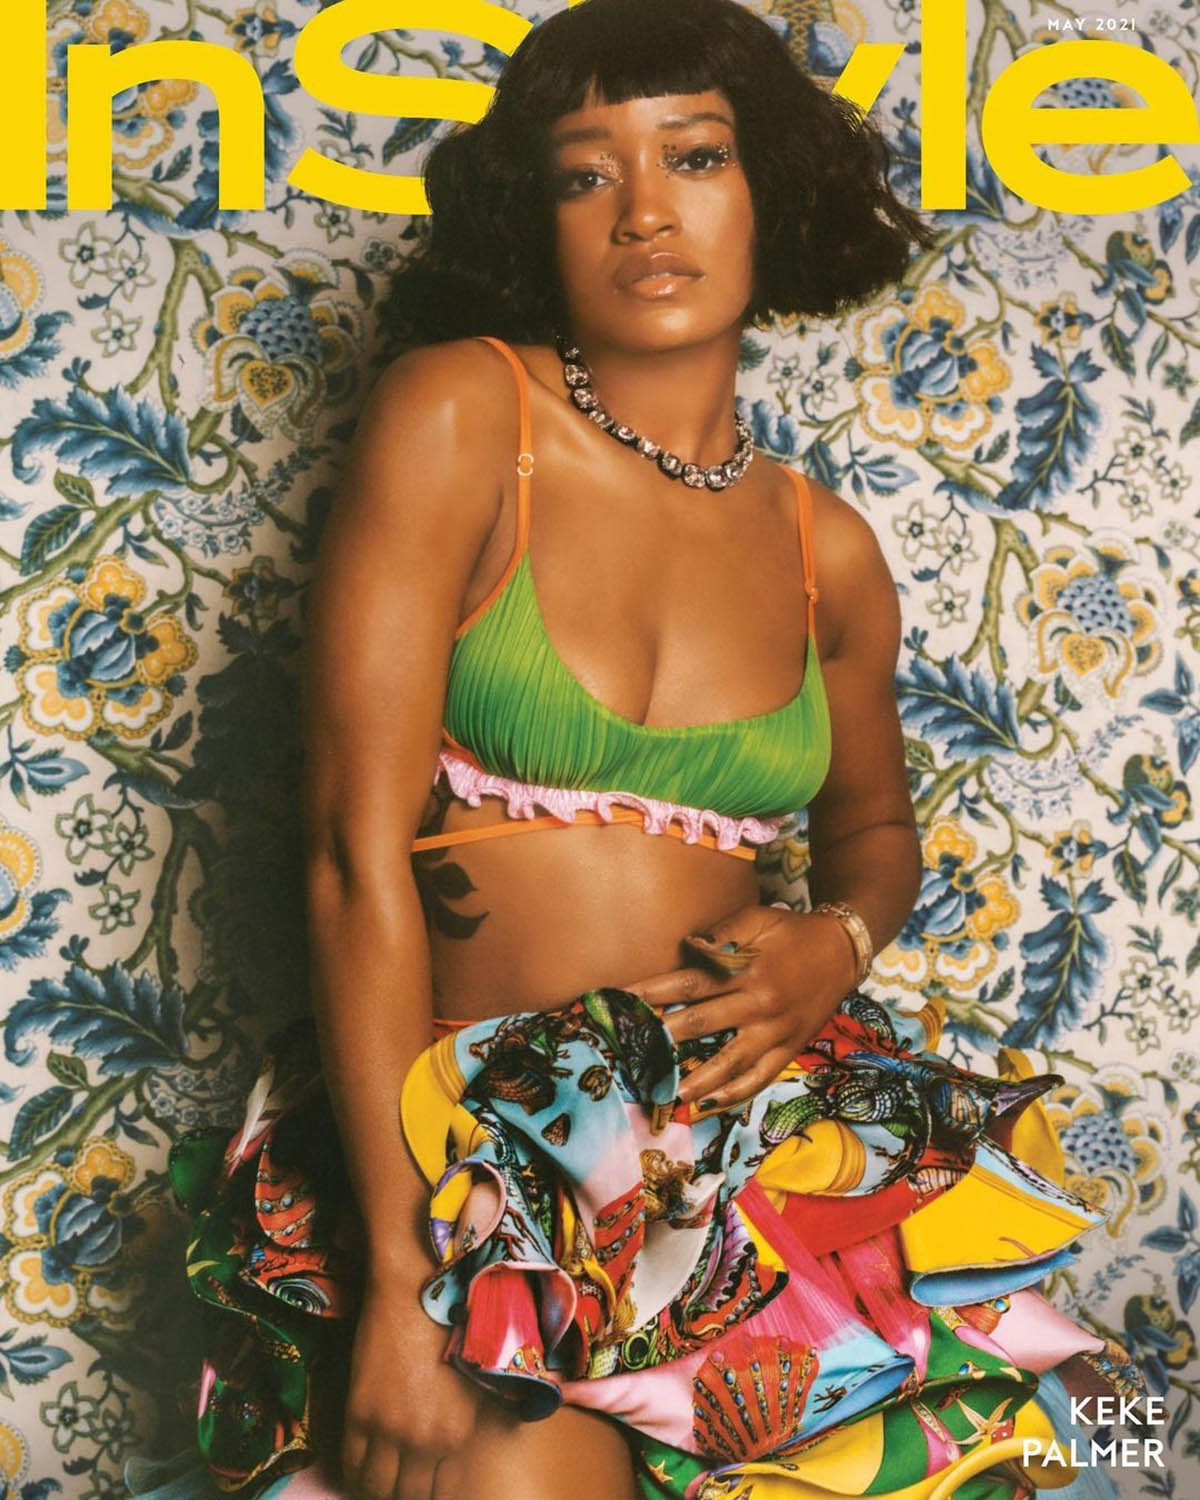 Keke Palmer covers InStyle US May 2021 Digital Edition by Quil Lemons